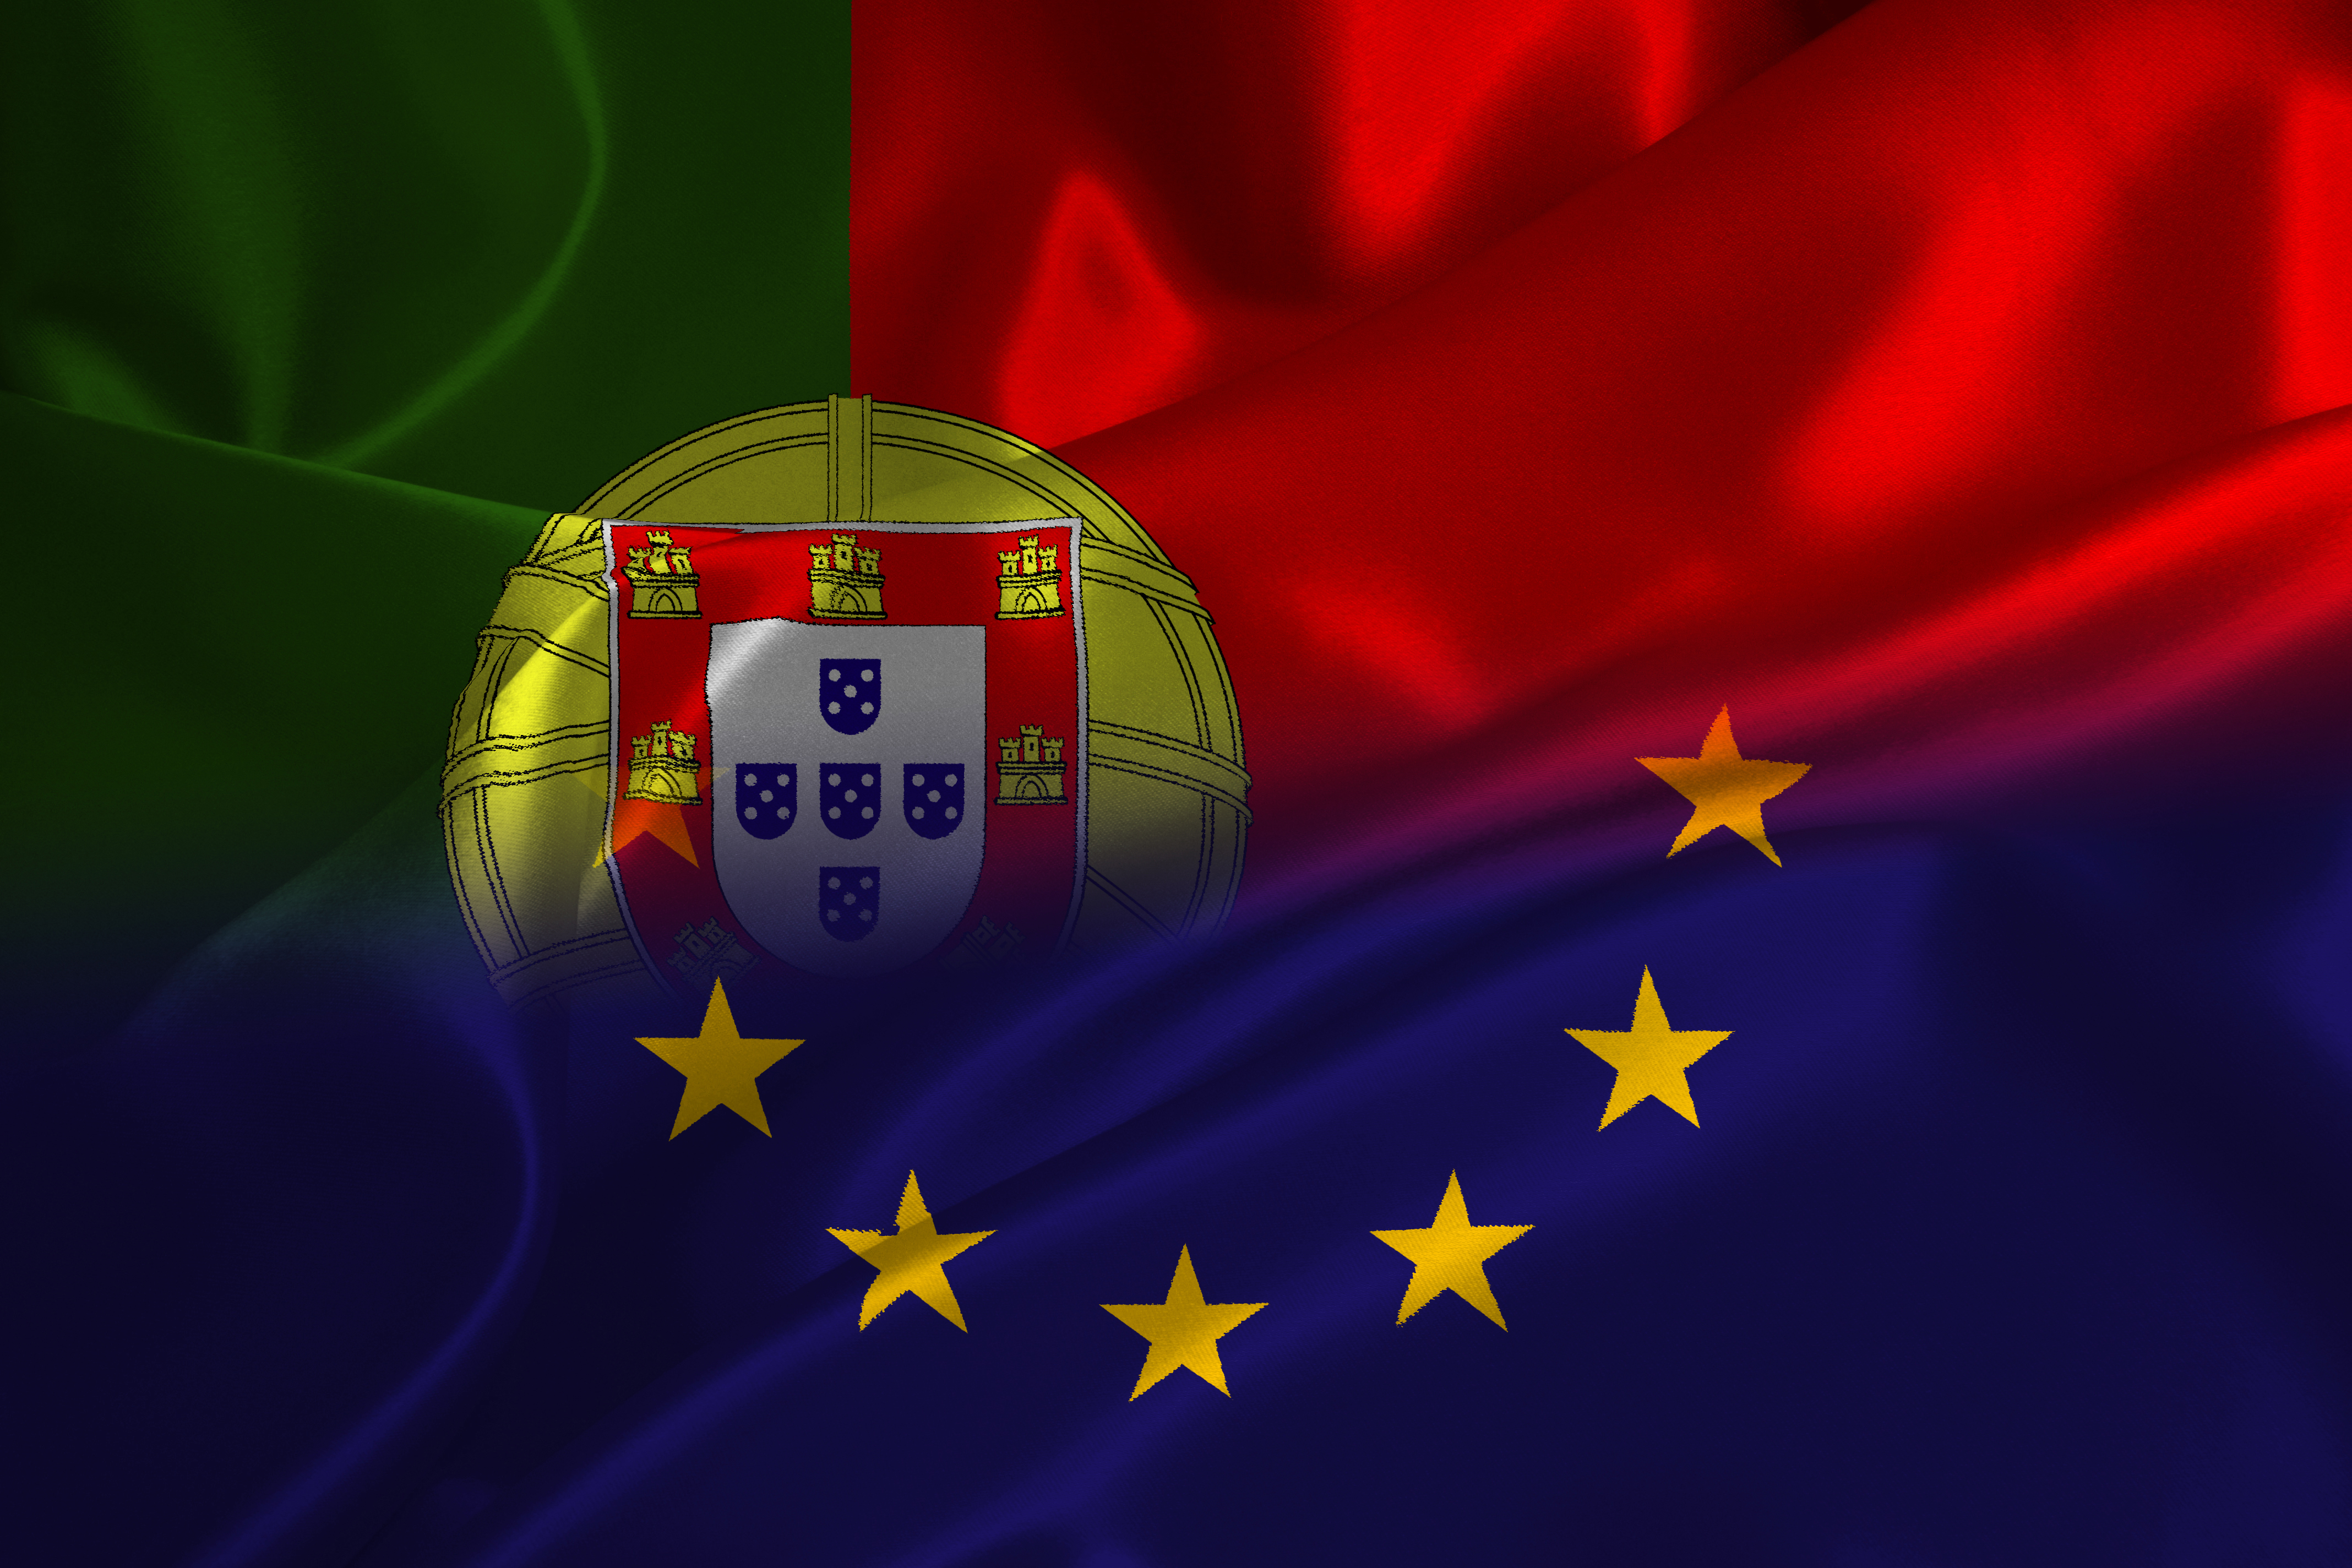 Flag of Portugal, an EU member country where the Golden Visa is issued